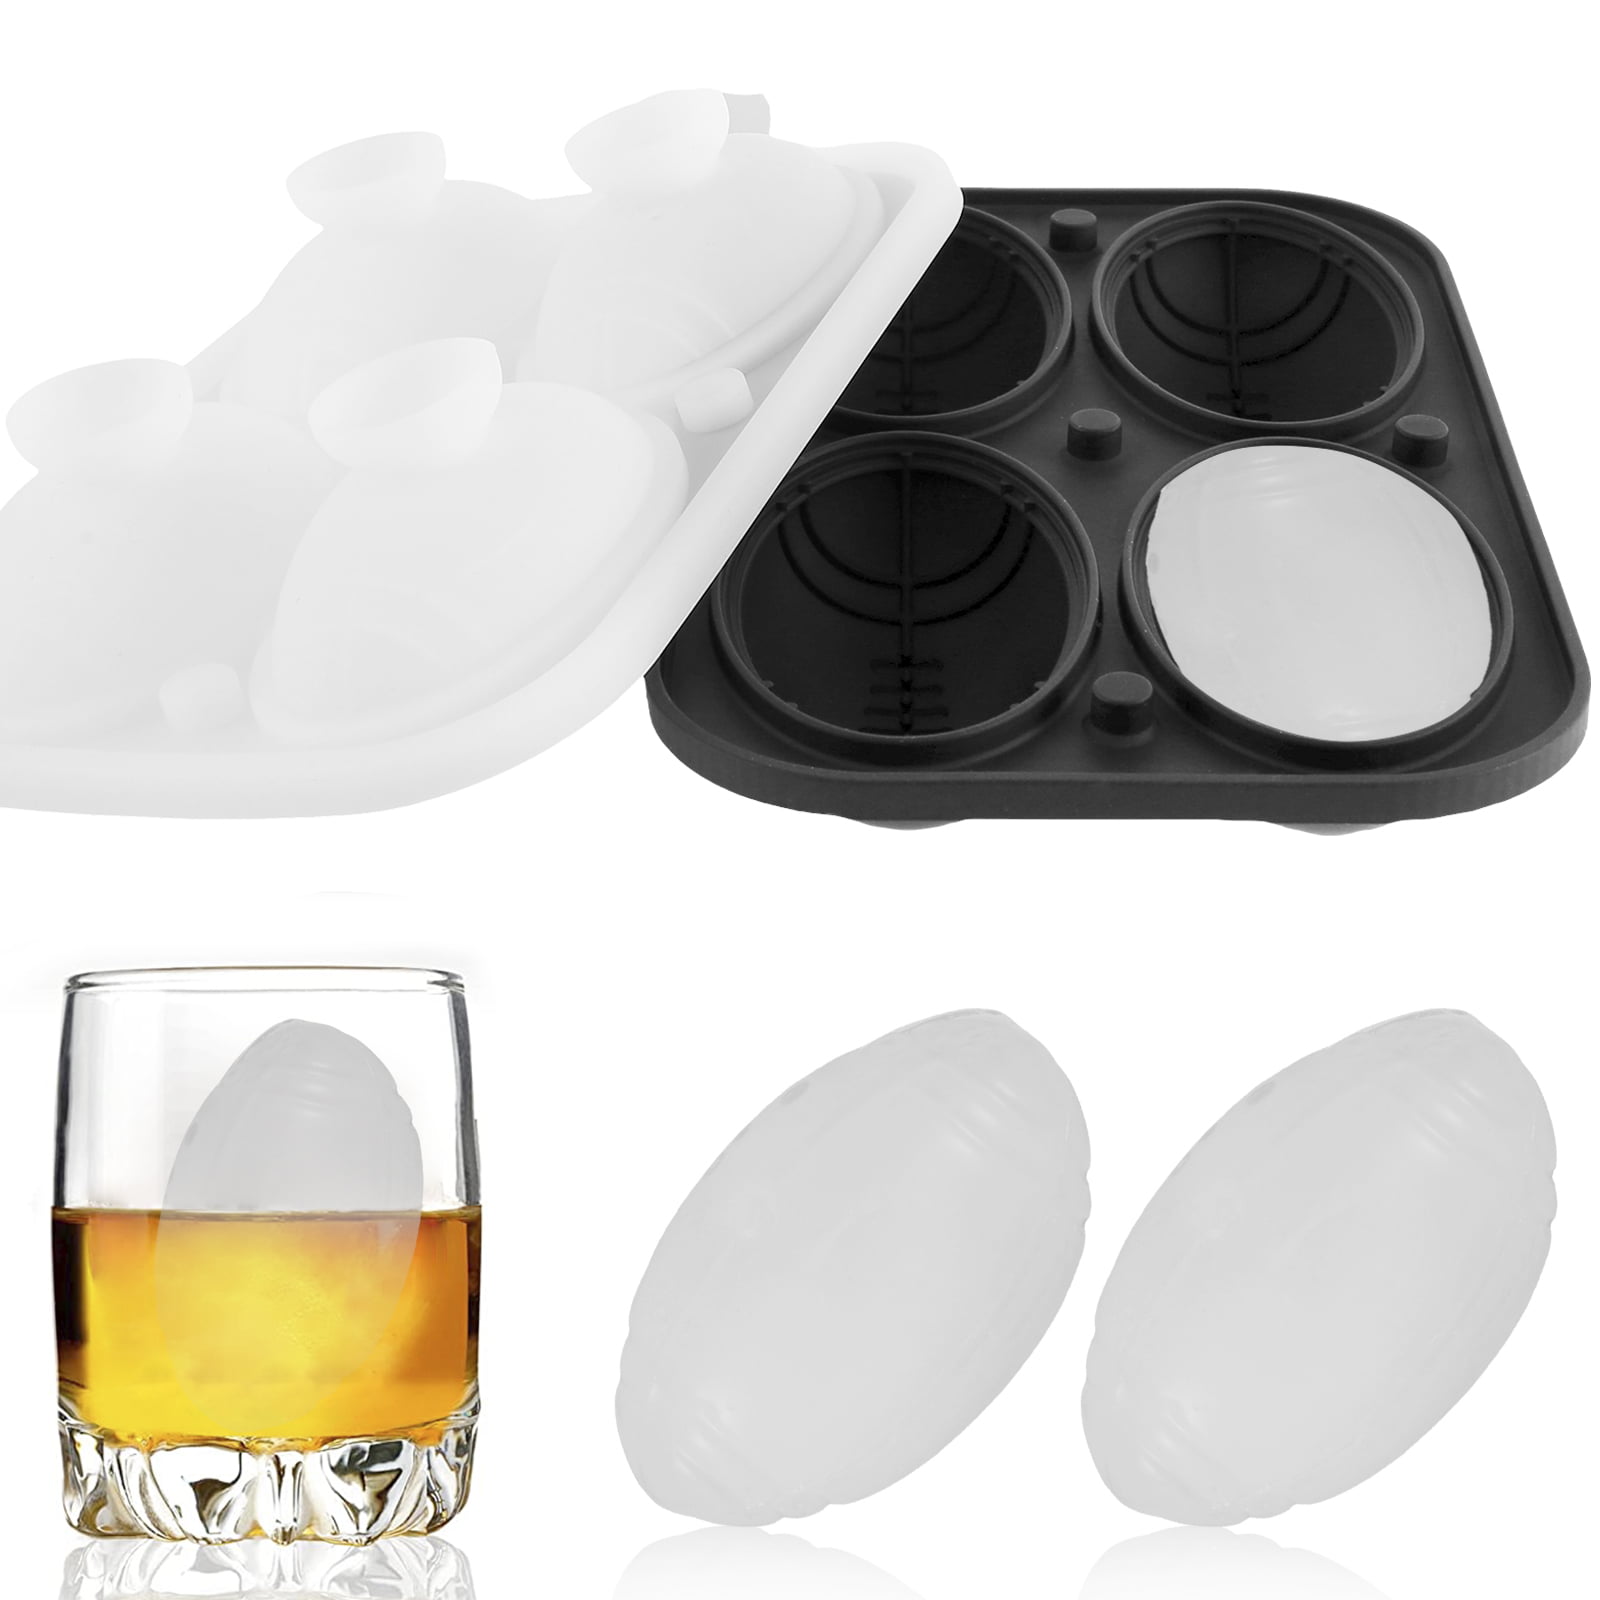 Big Ice Cubes Are Better—So Freeze a Batch With These Molds